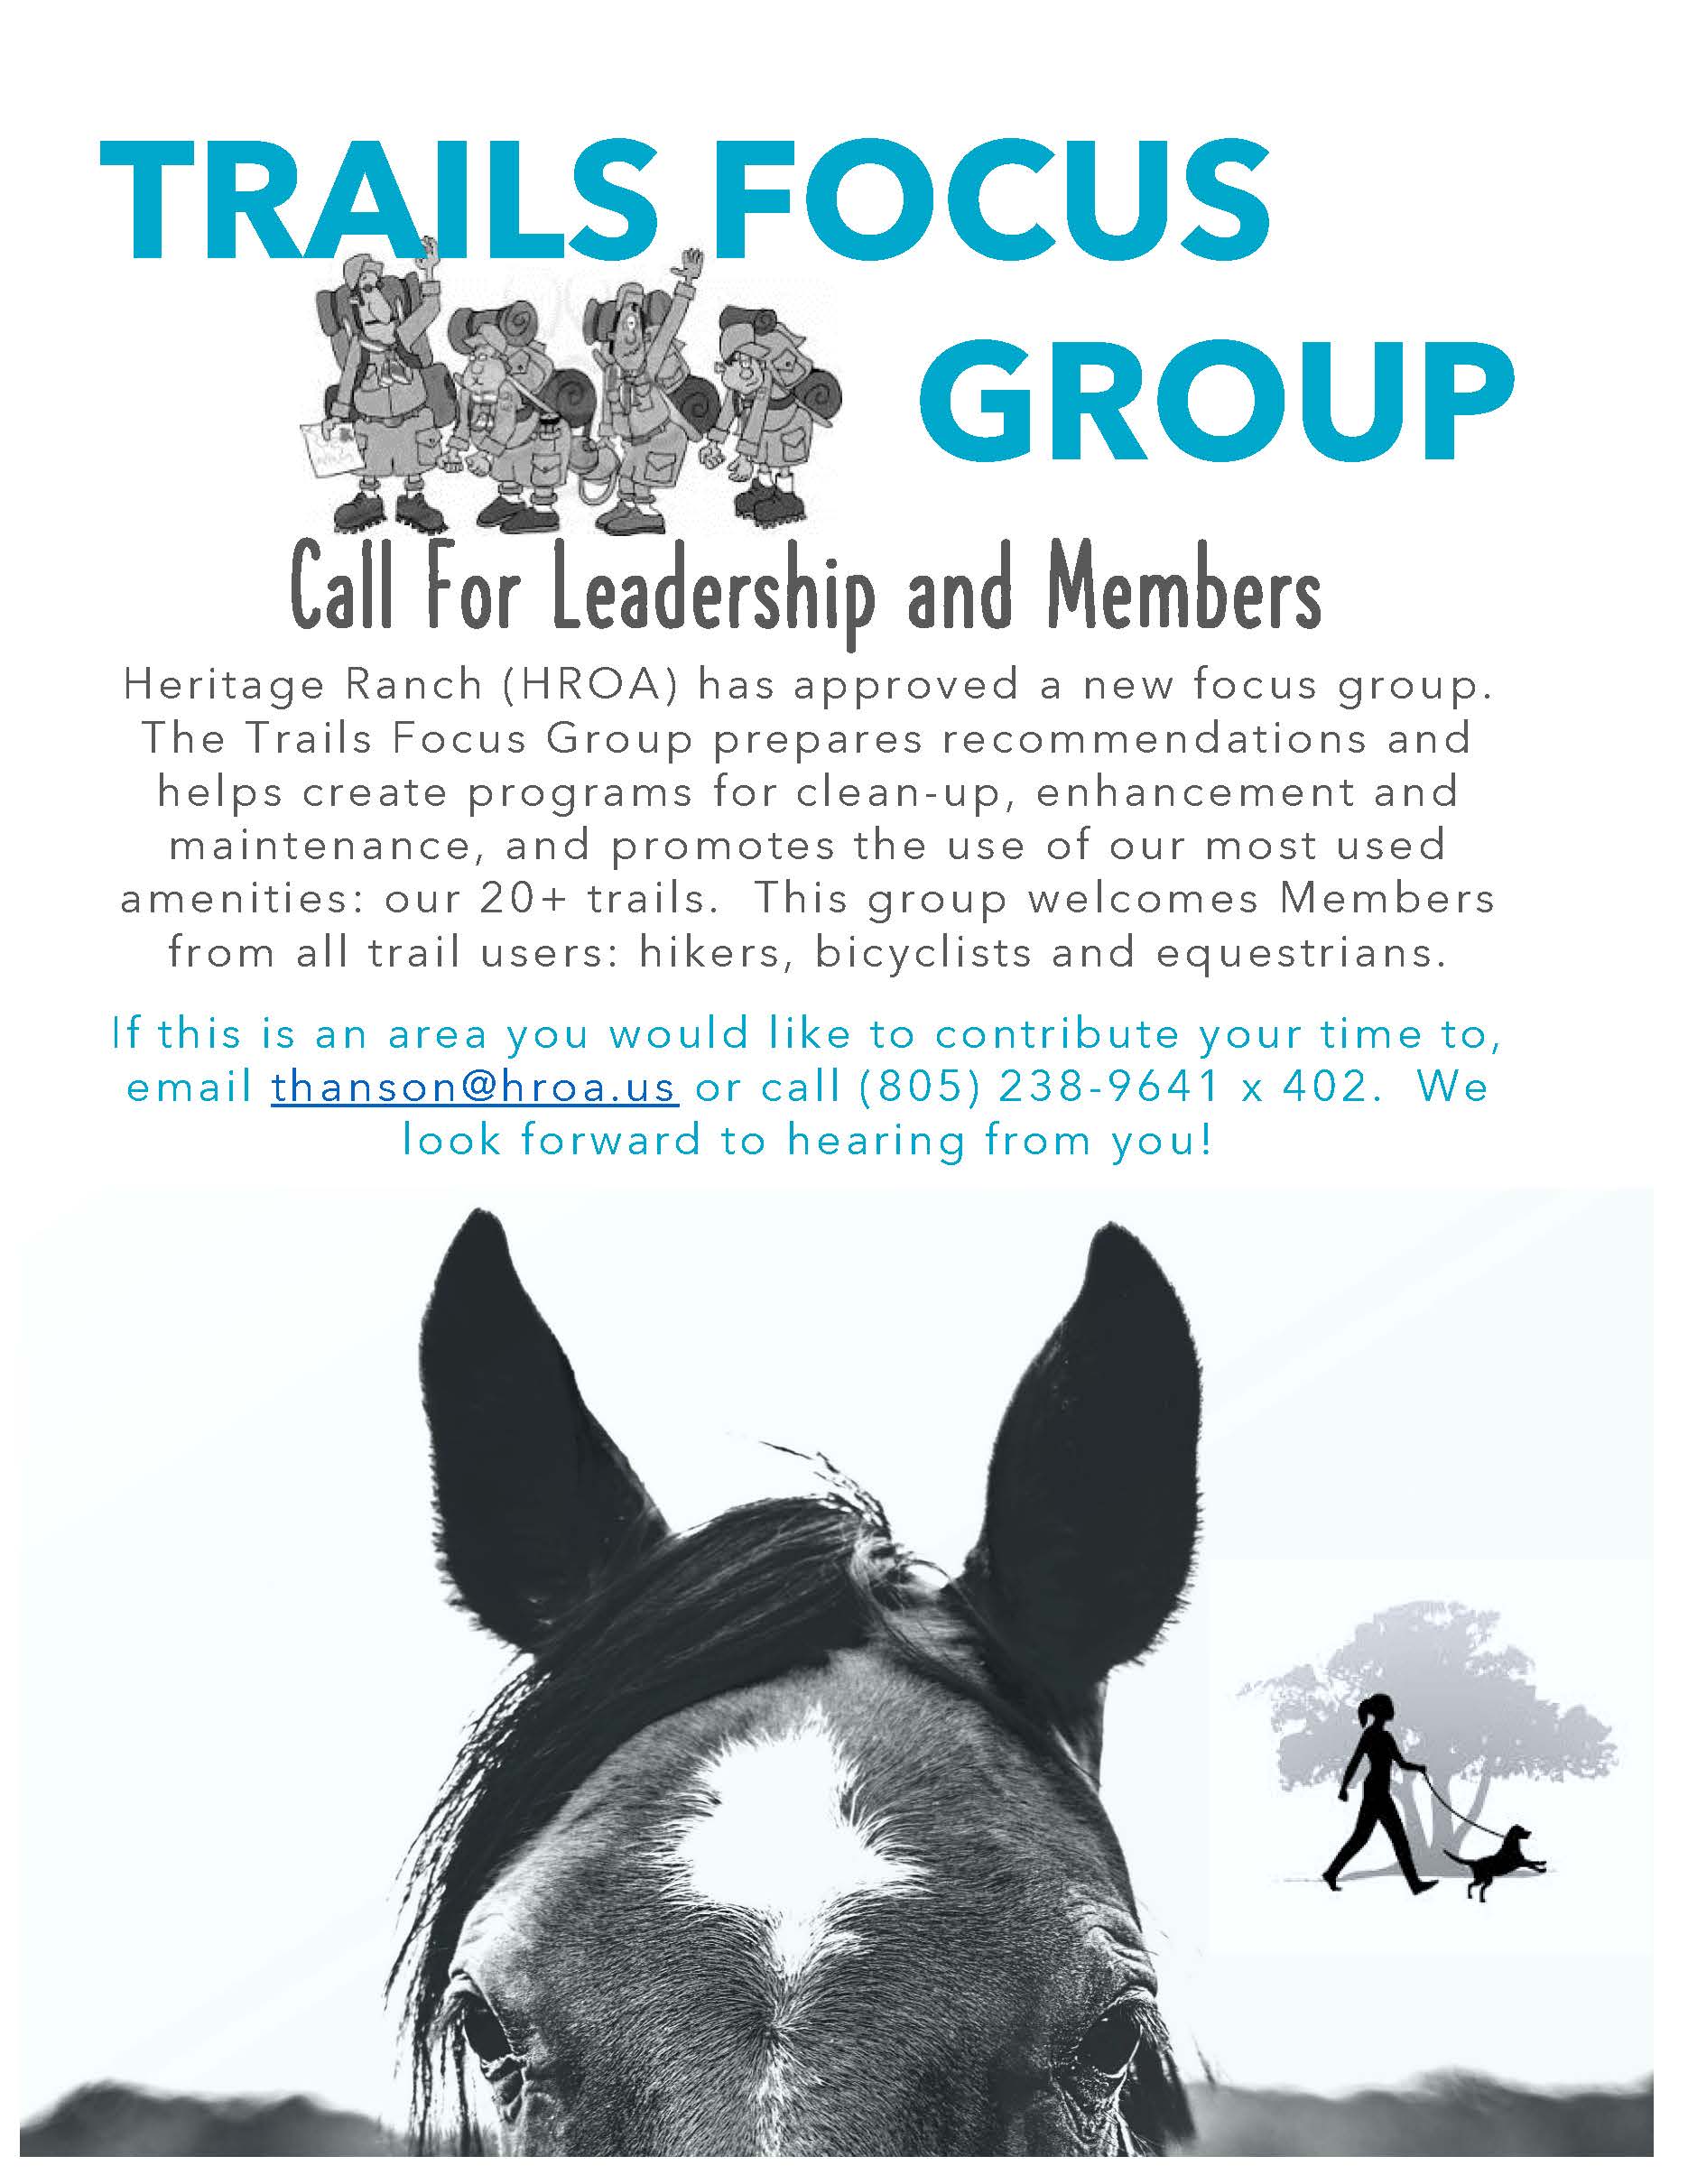 Trails Focus Group - Call for Members